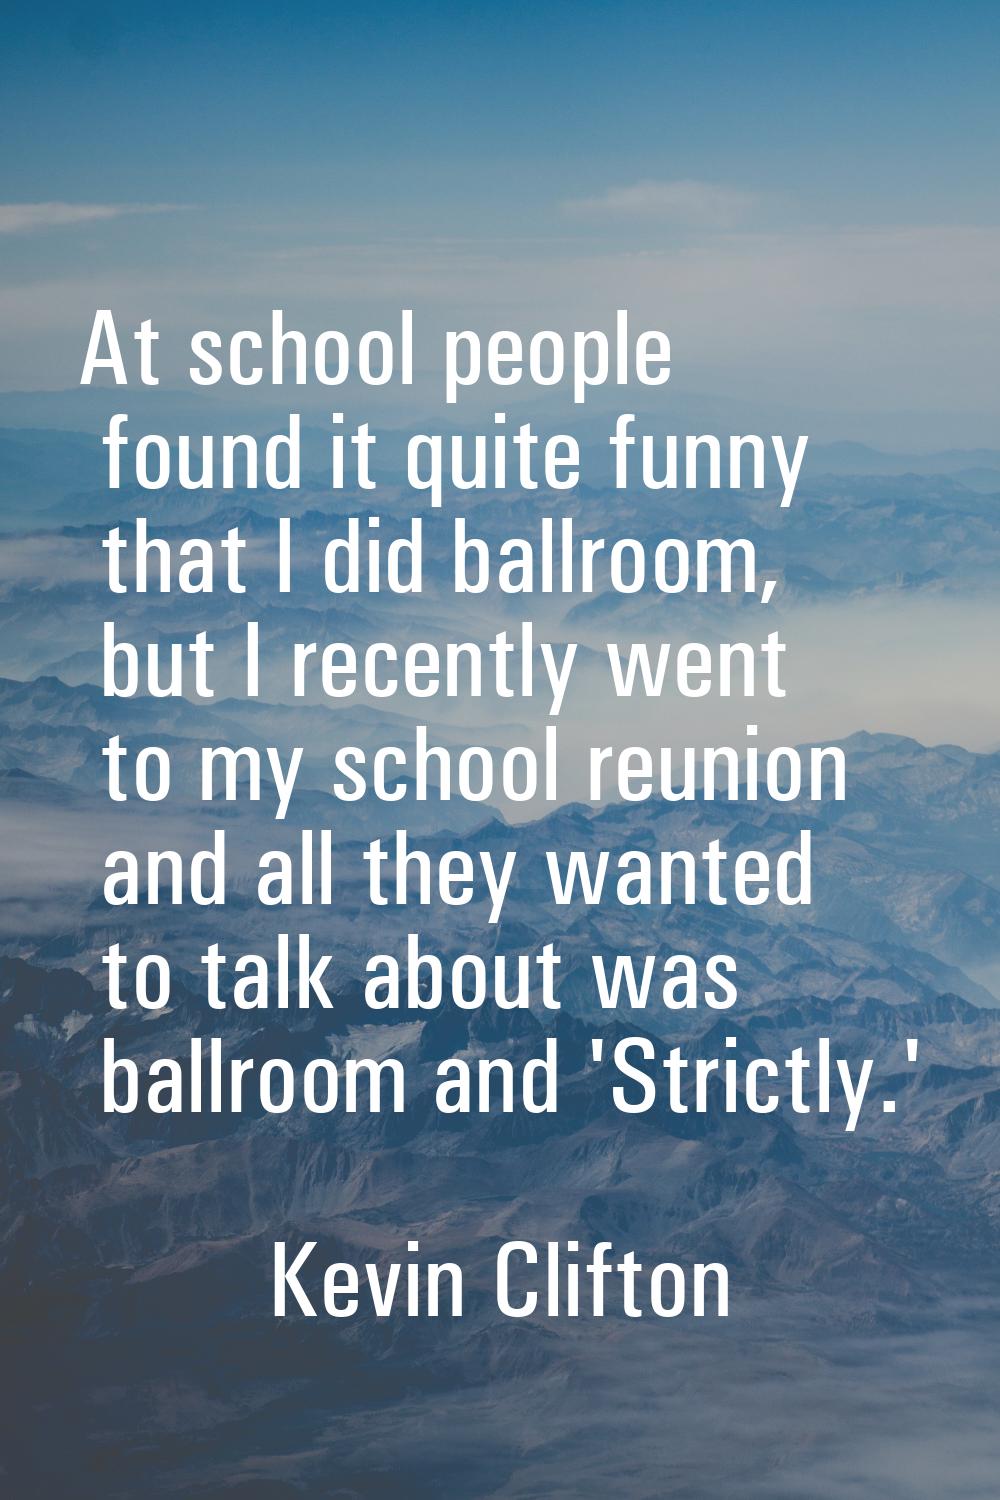 At school people found it quite funny that I did ballroom, but I recently went to my school reunion